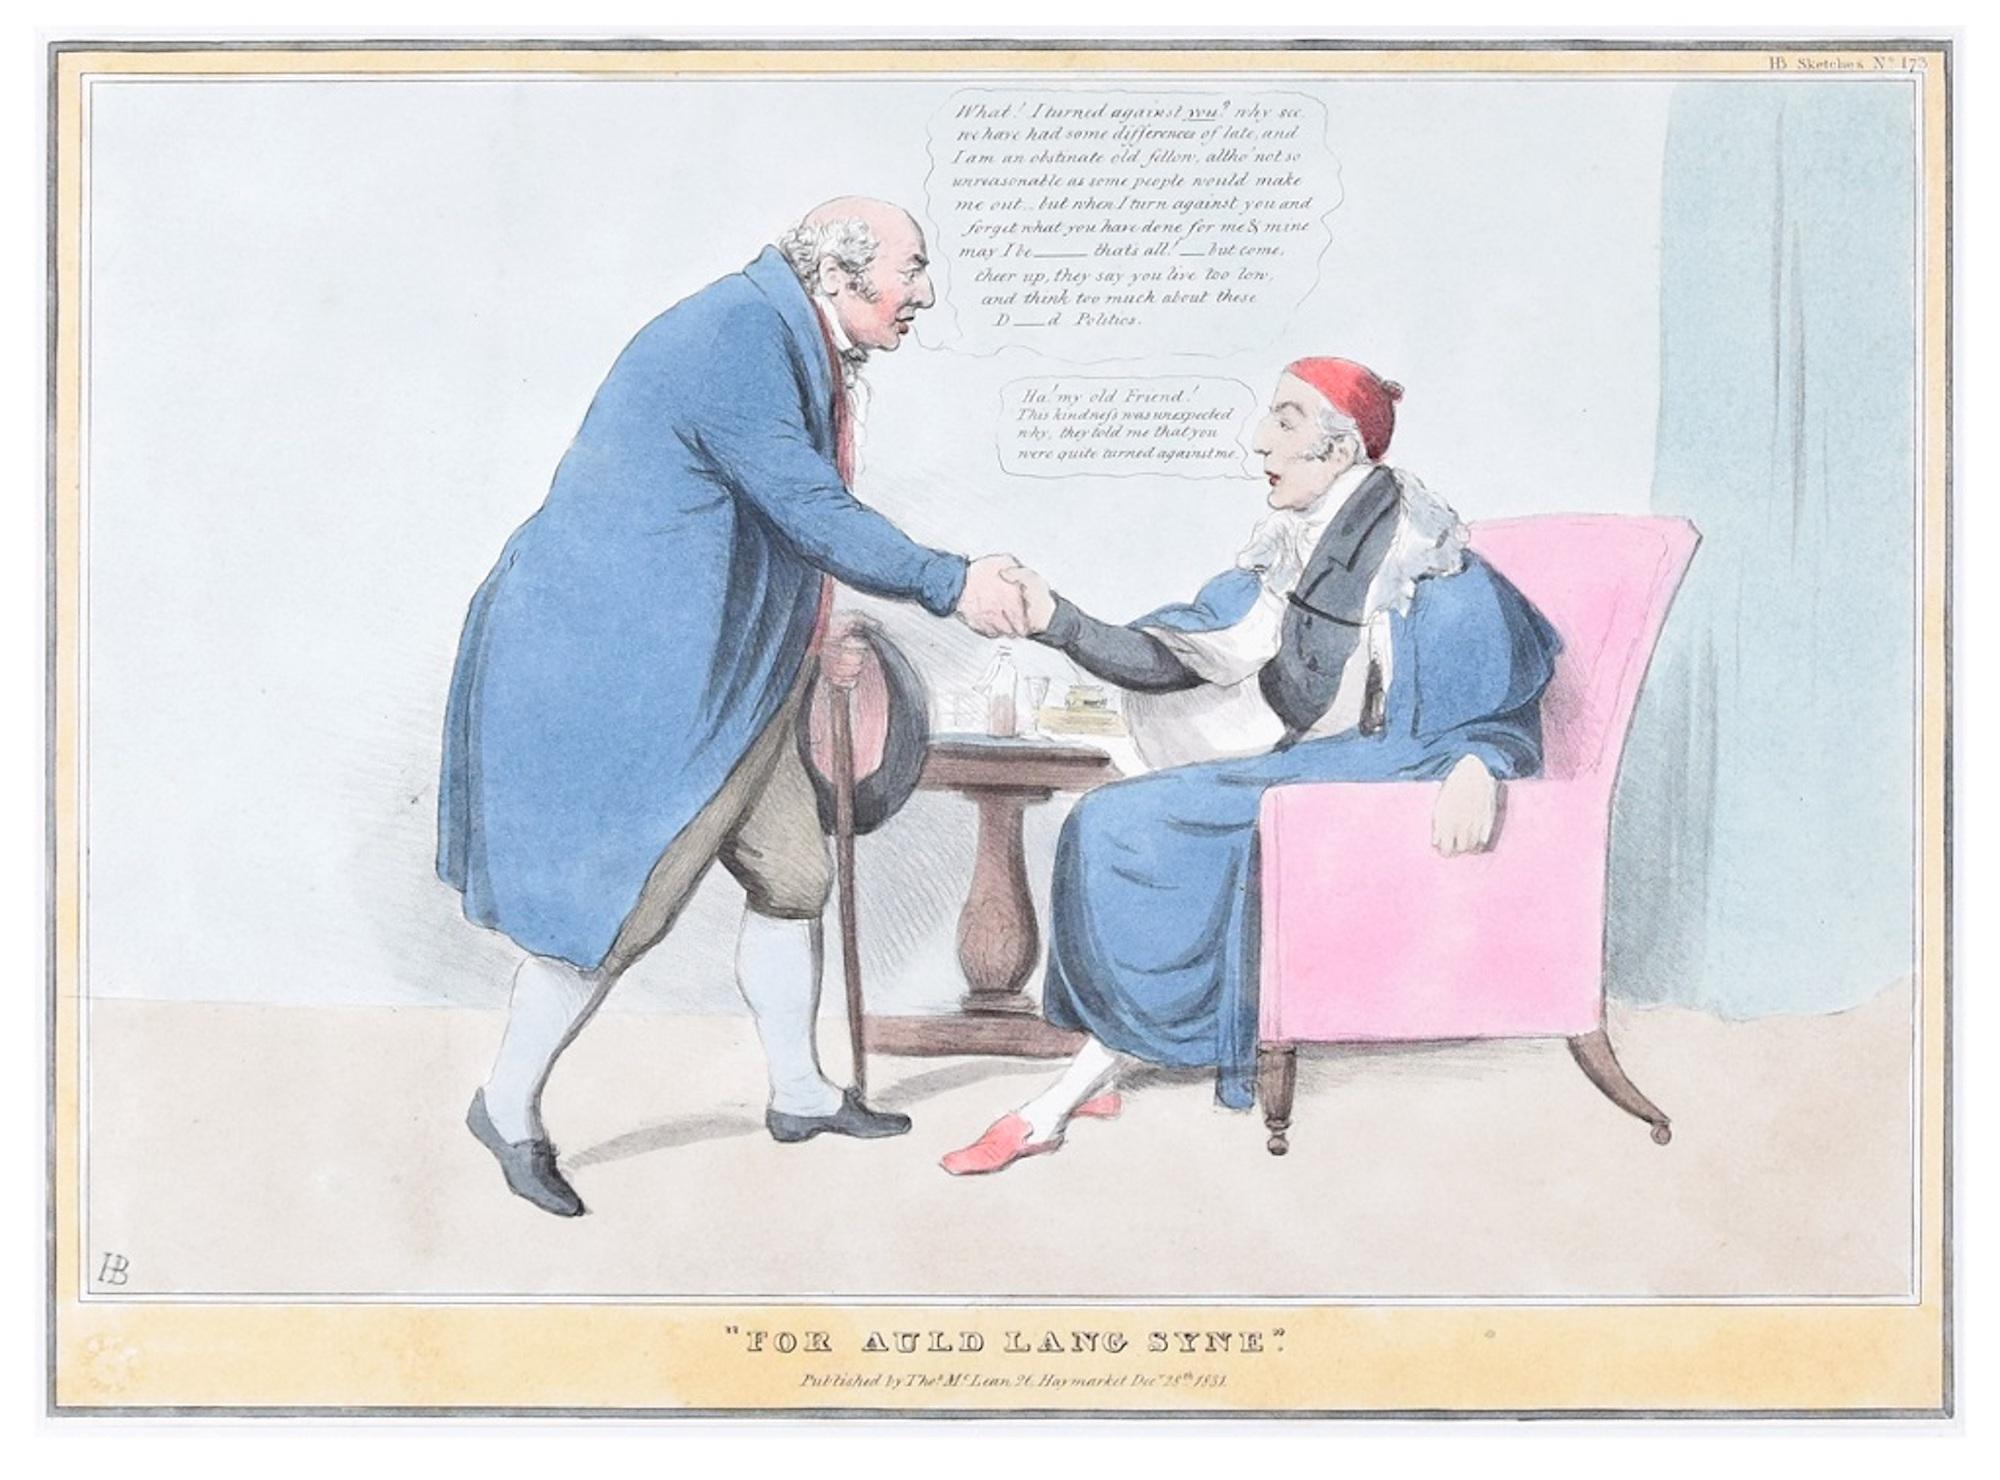 John Doyle Figurative Print - For Auld Lang Syne - Lithograph by J. Doyle - 1831